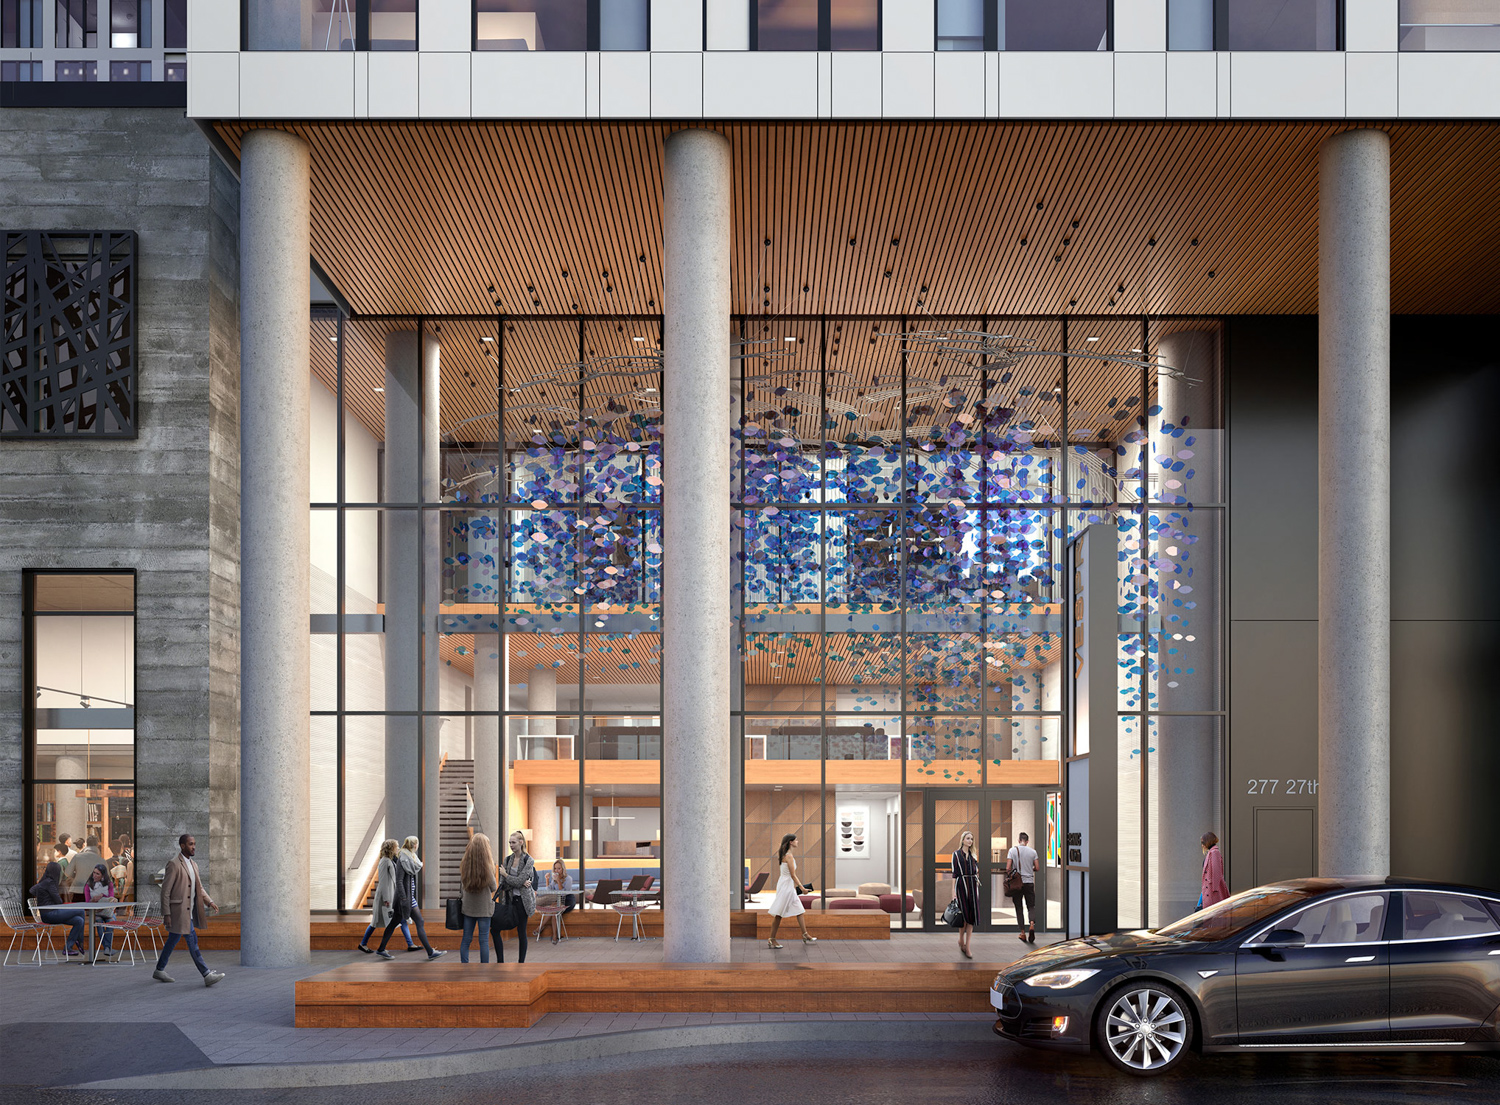 24th and Harrison entrance, rendering courtesy HKS